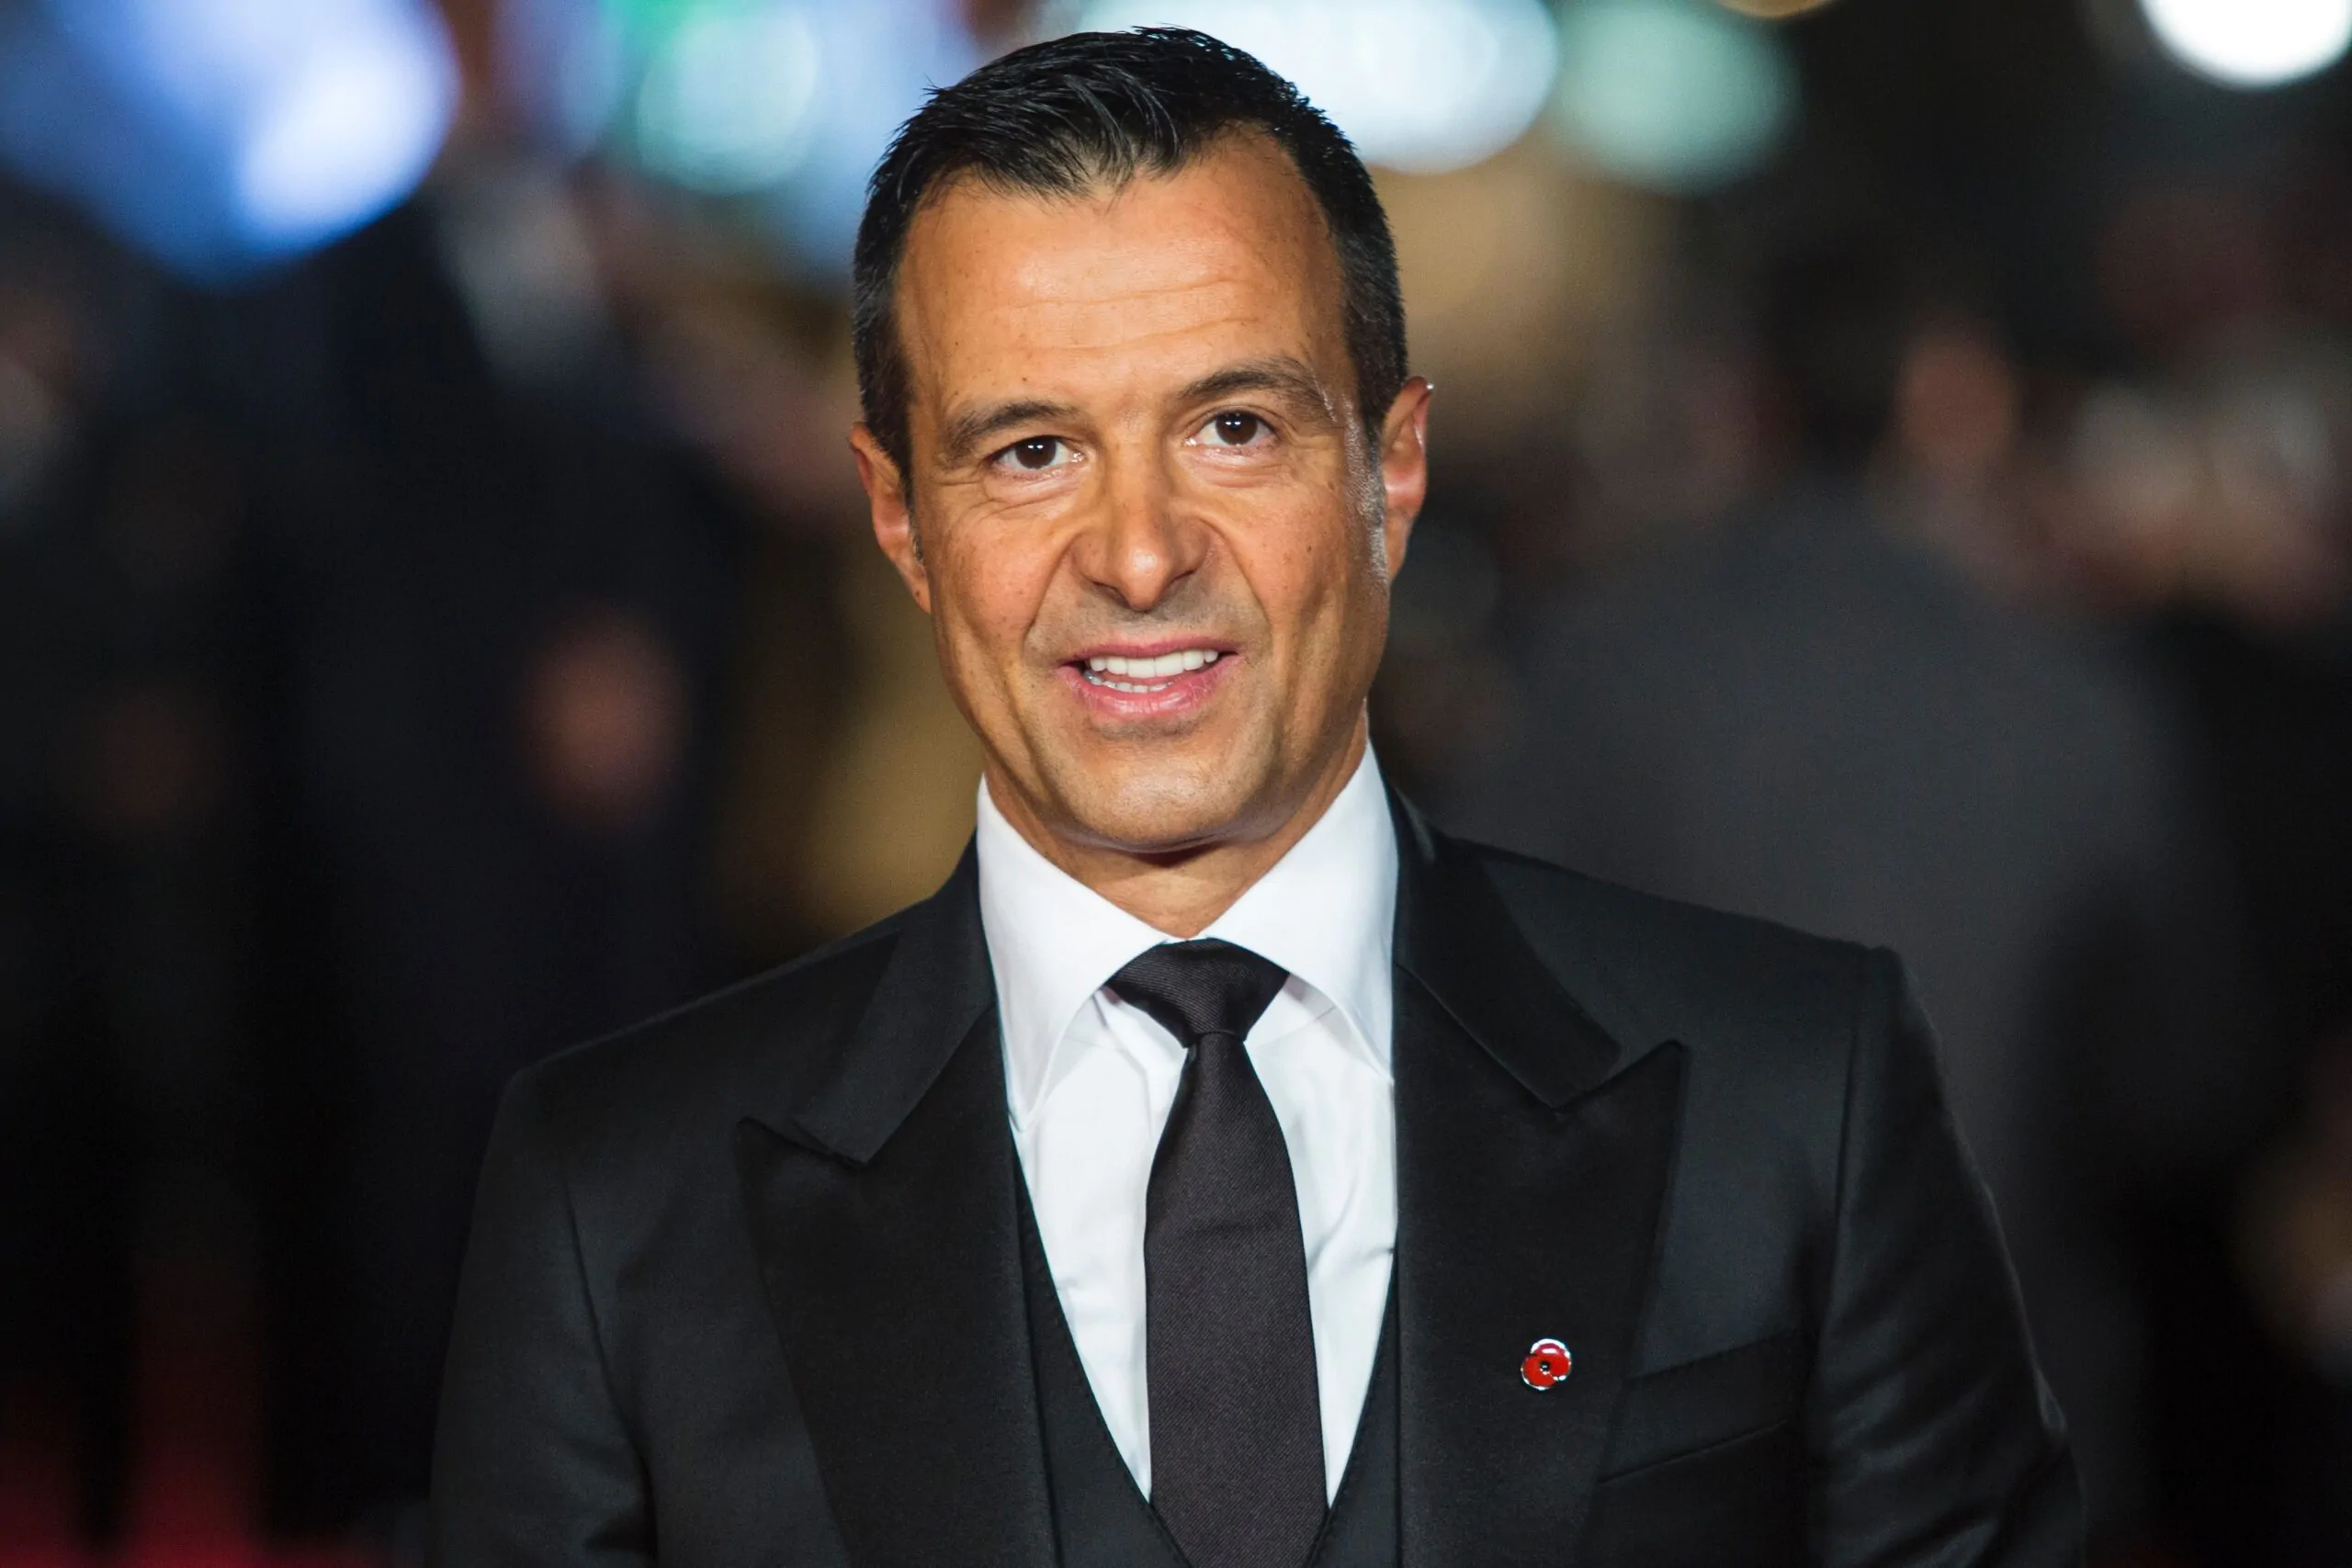 Jorge Mendes wants to do some business with Milan would be ready to bring more of his clients to the club if they hired Sergio Conceiçao.